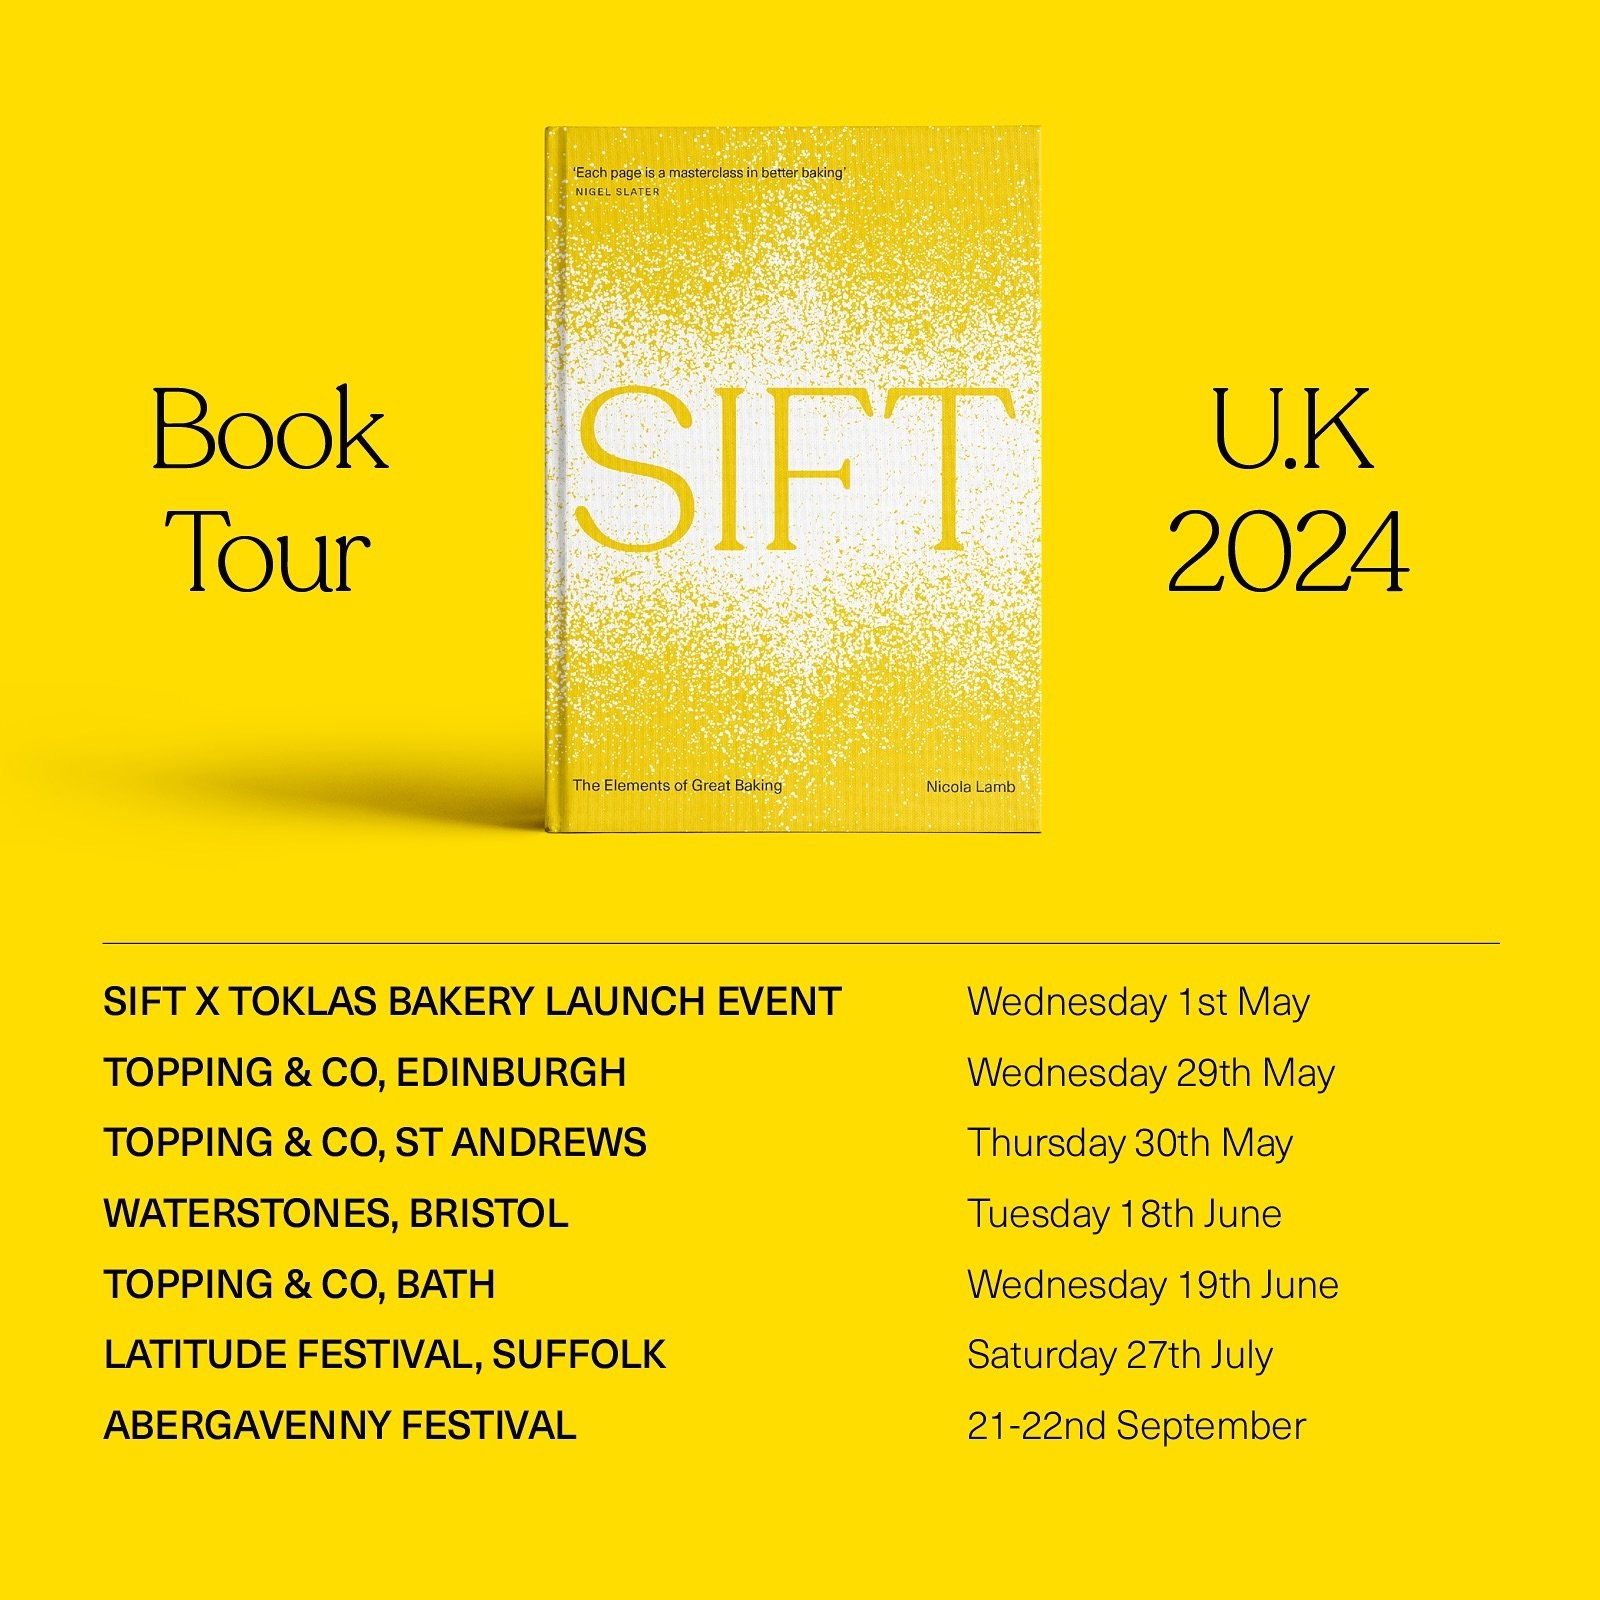 📒 SIFT ON TOUR! 📒

I am so thrilled to announce that I&rsquo;ll be taking SIFT on a book tour around the UK over the next few months! 
I&rsquo;ll be bopping around bookshops &amp; festivals across the country and I am so excited to meet as many of 